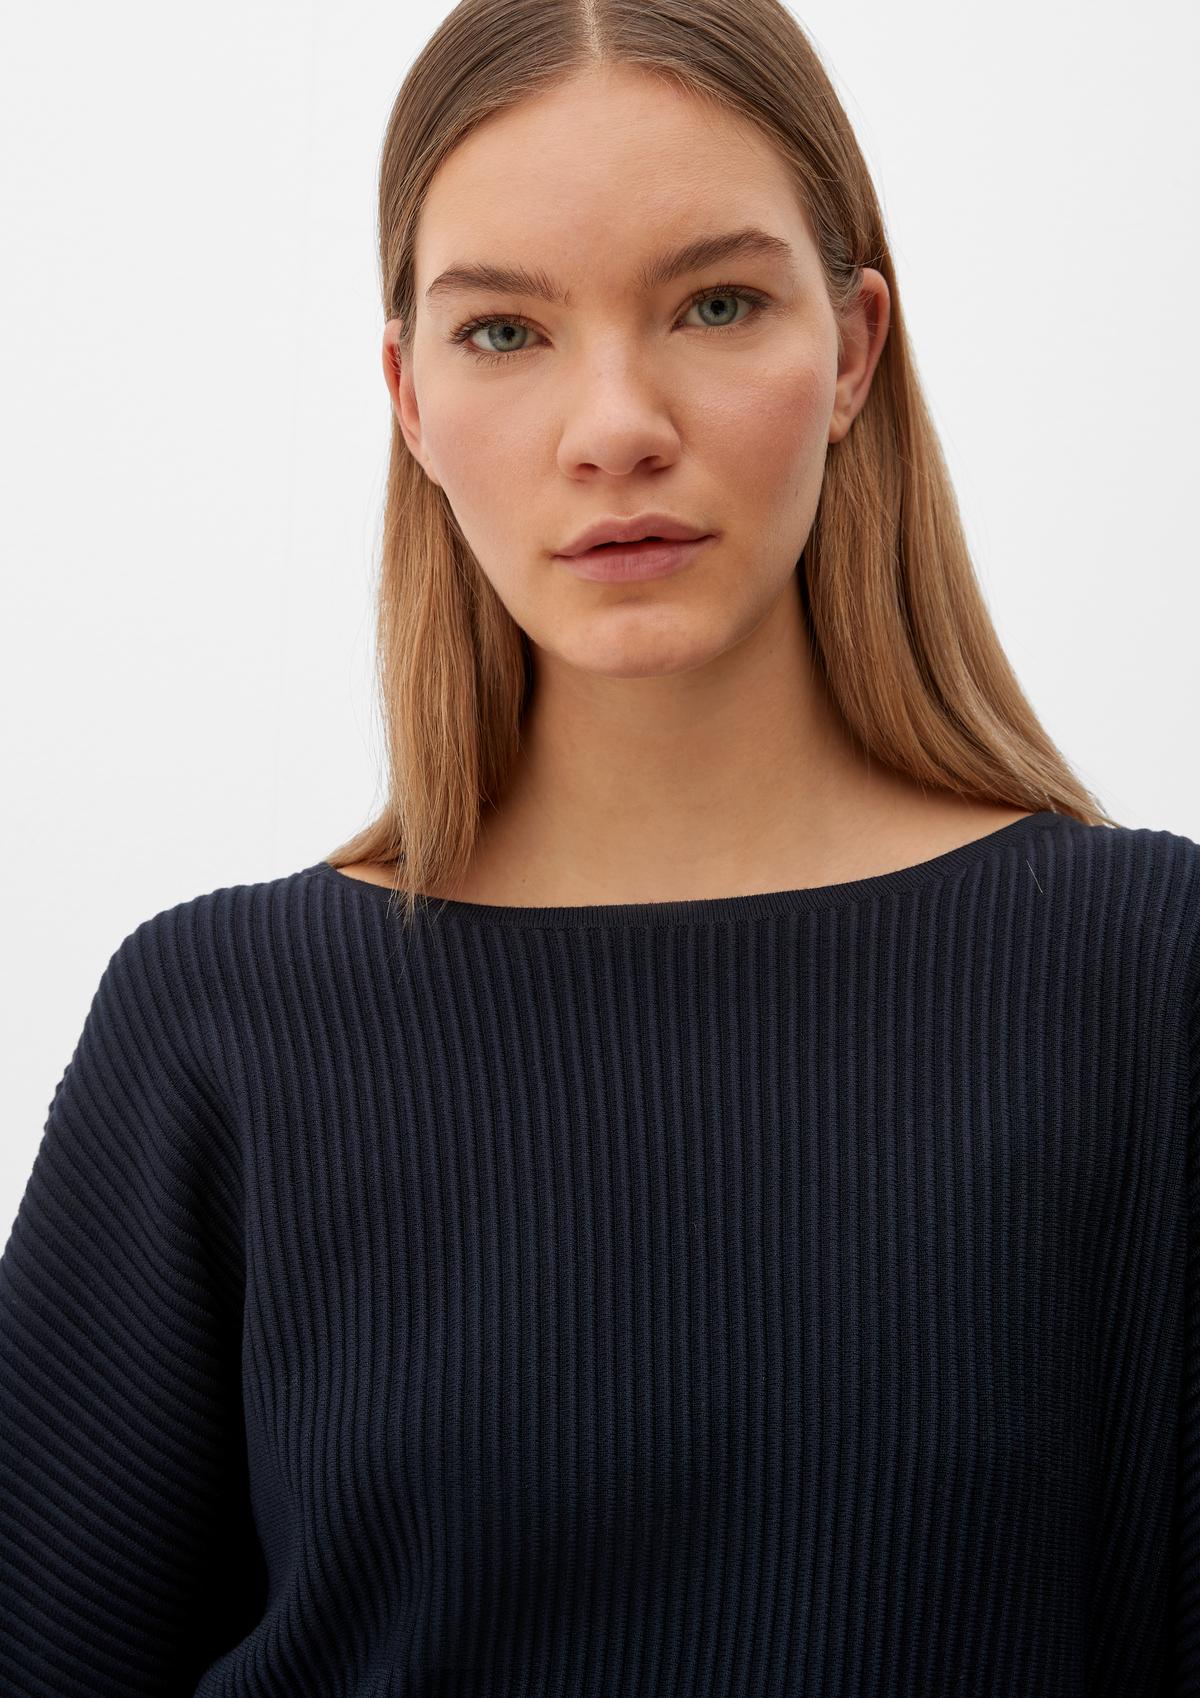 s.Oliver Knitted jumper with a bateau neckline